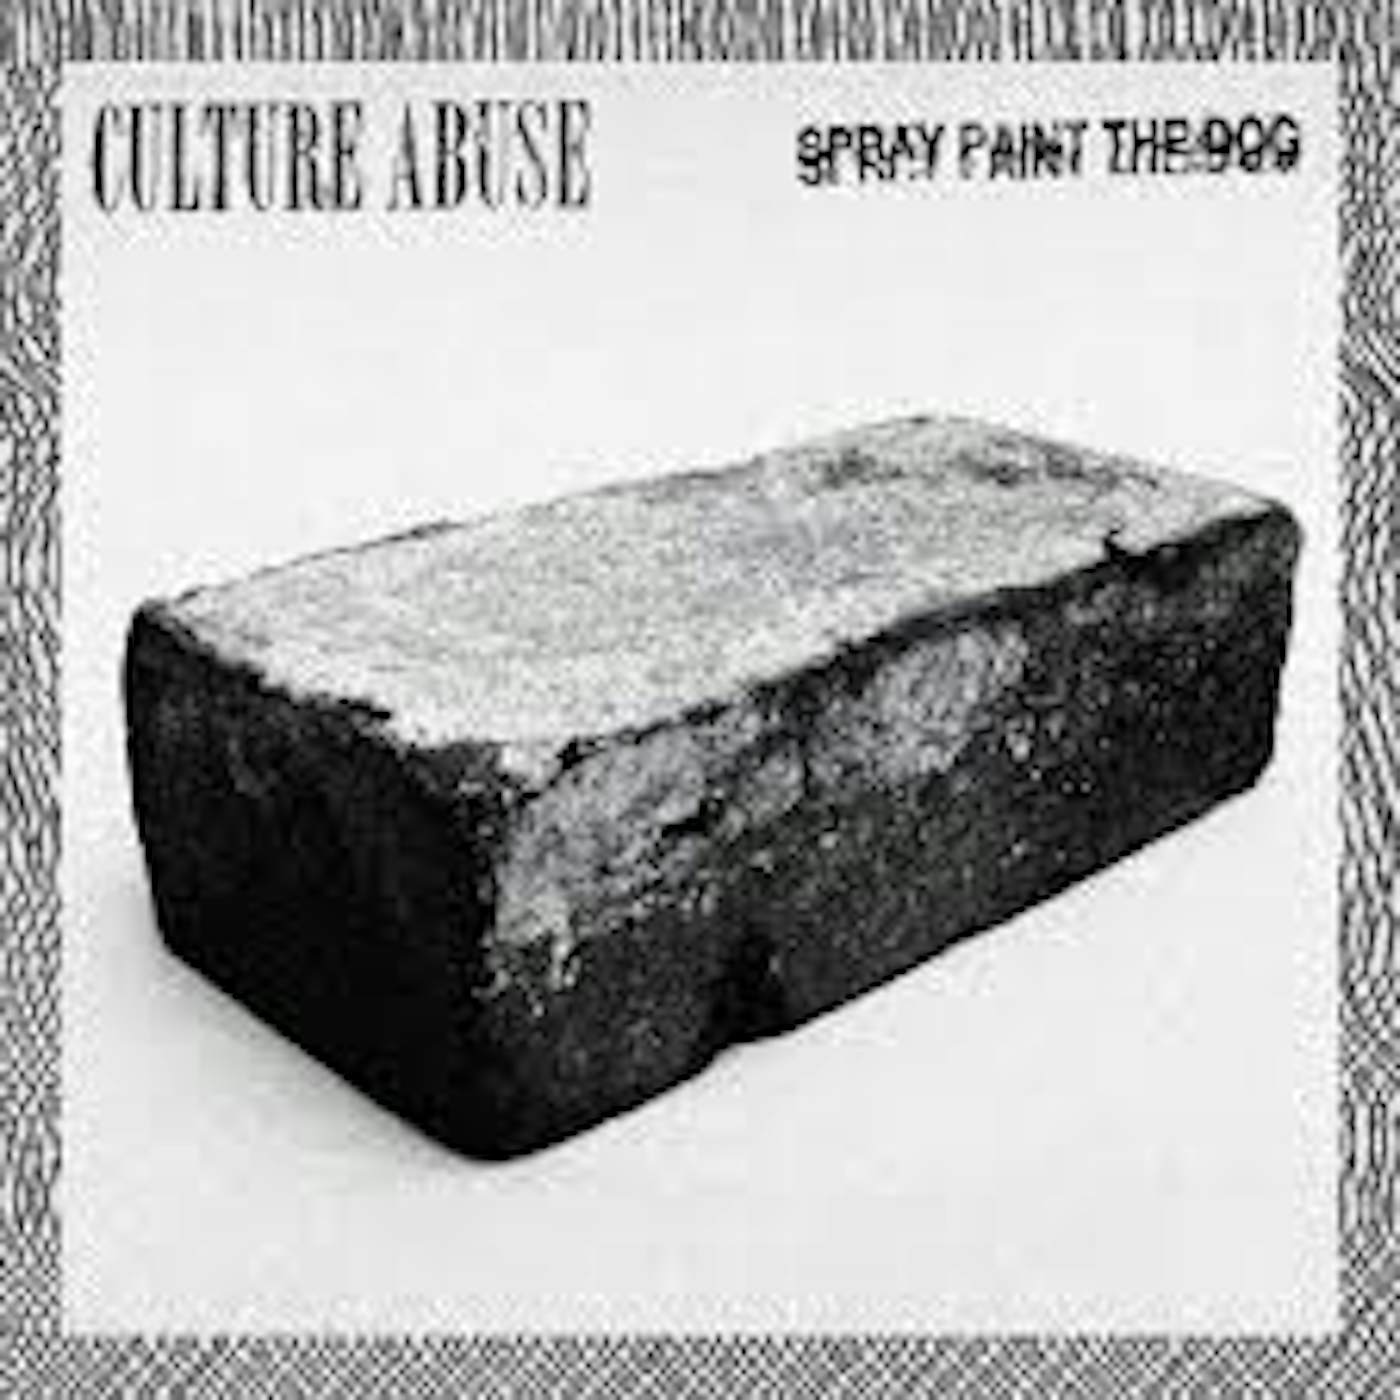 Culture Abuse Spray Paint The Dog Vinyl Record